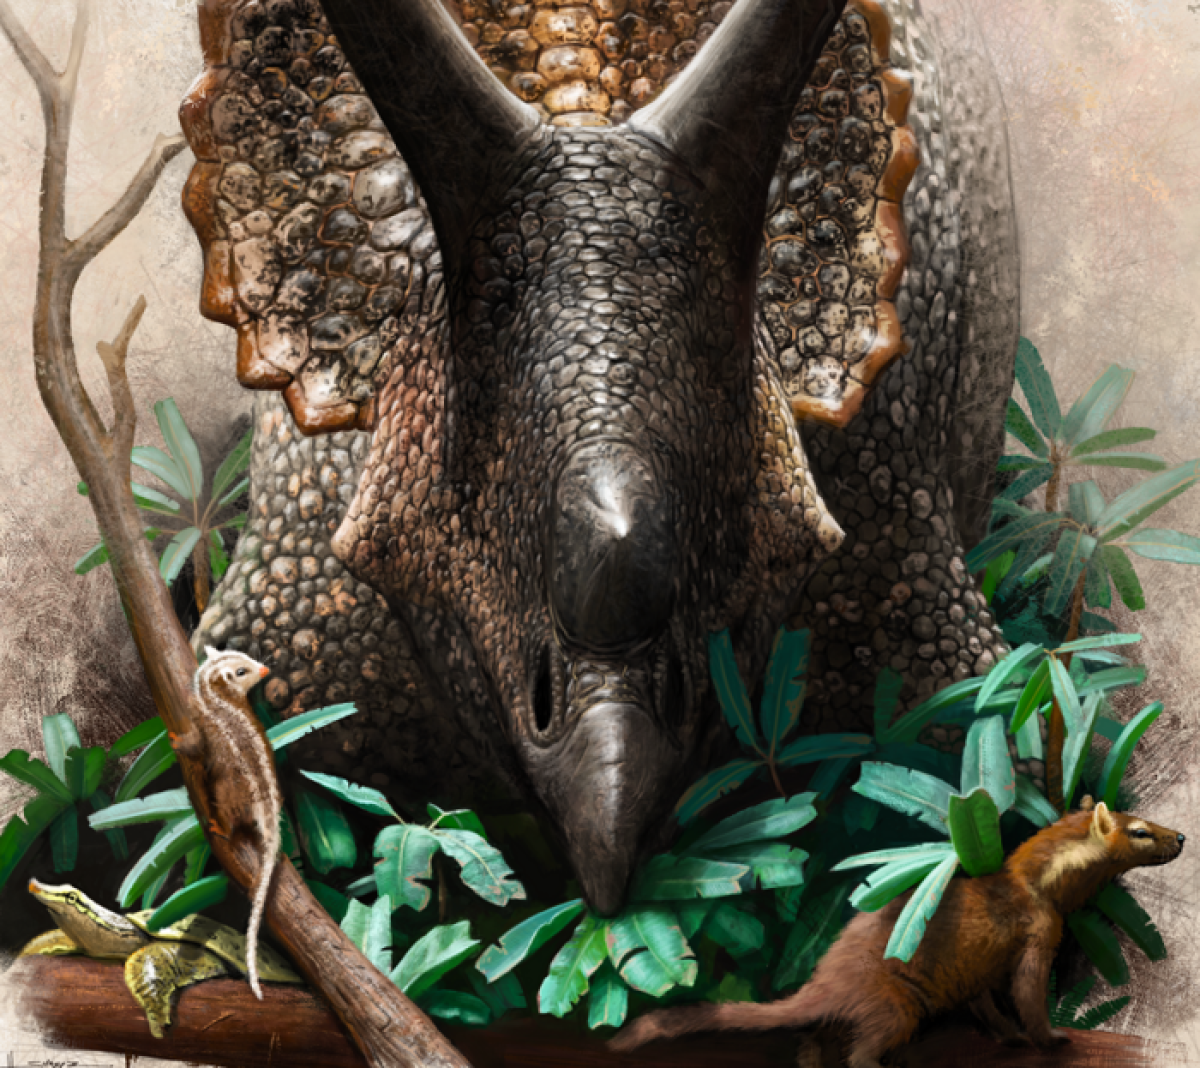 In this illustration, a Triceratops prorsus munches on cycads near primitive mammals and a softshell turtle.